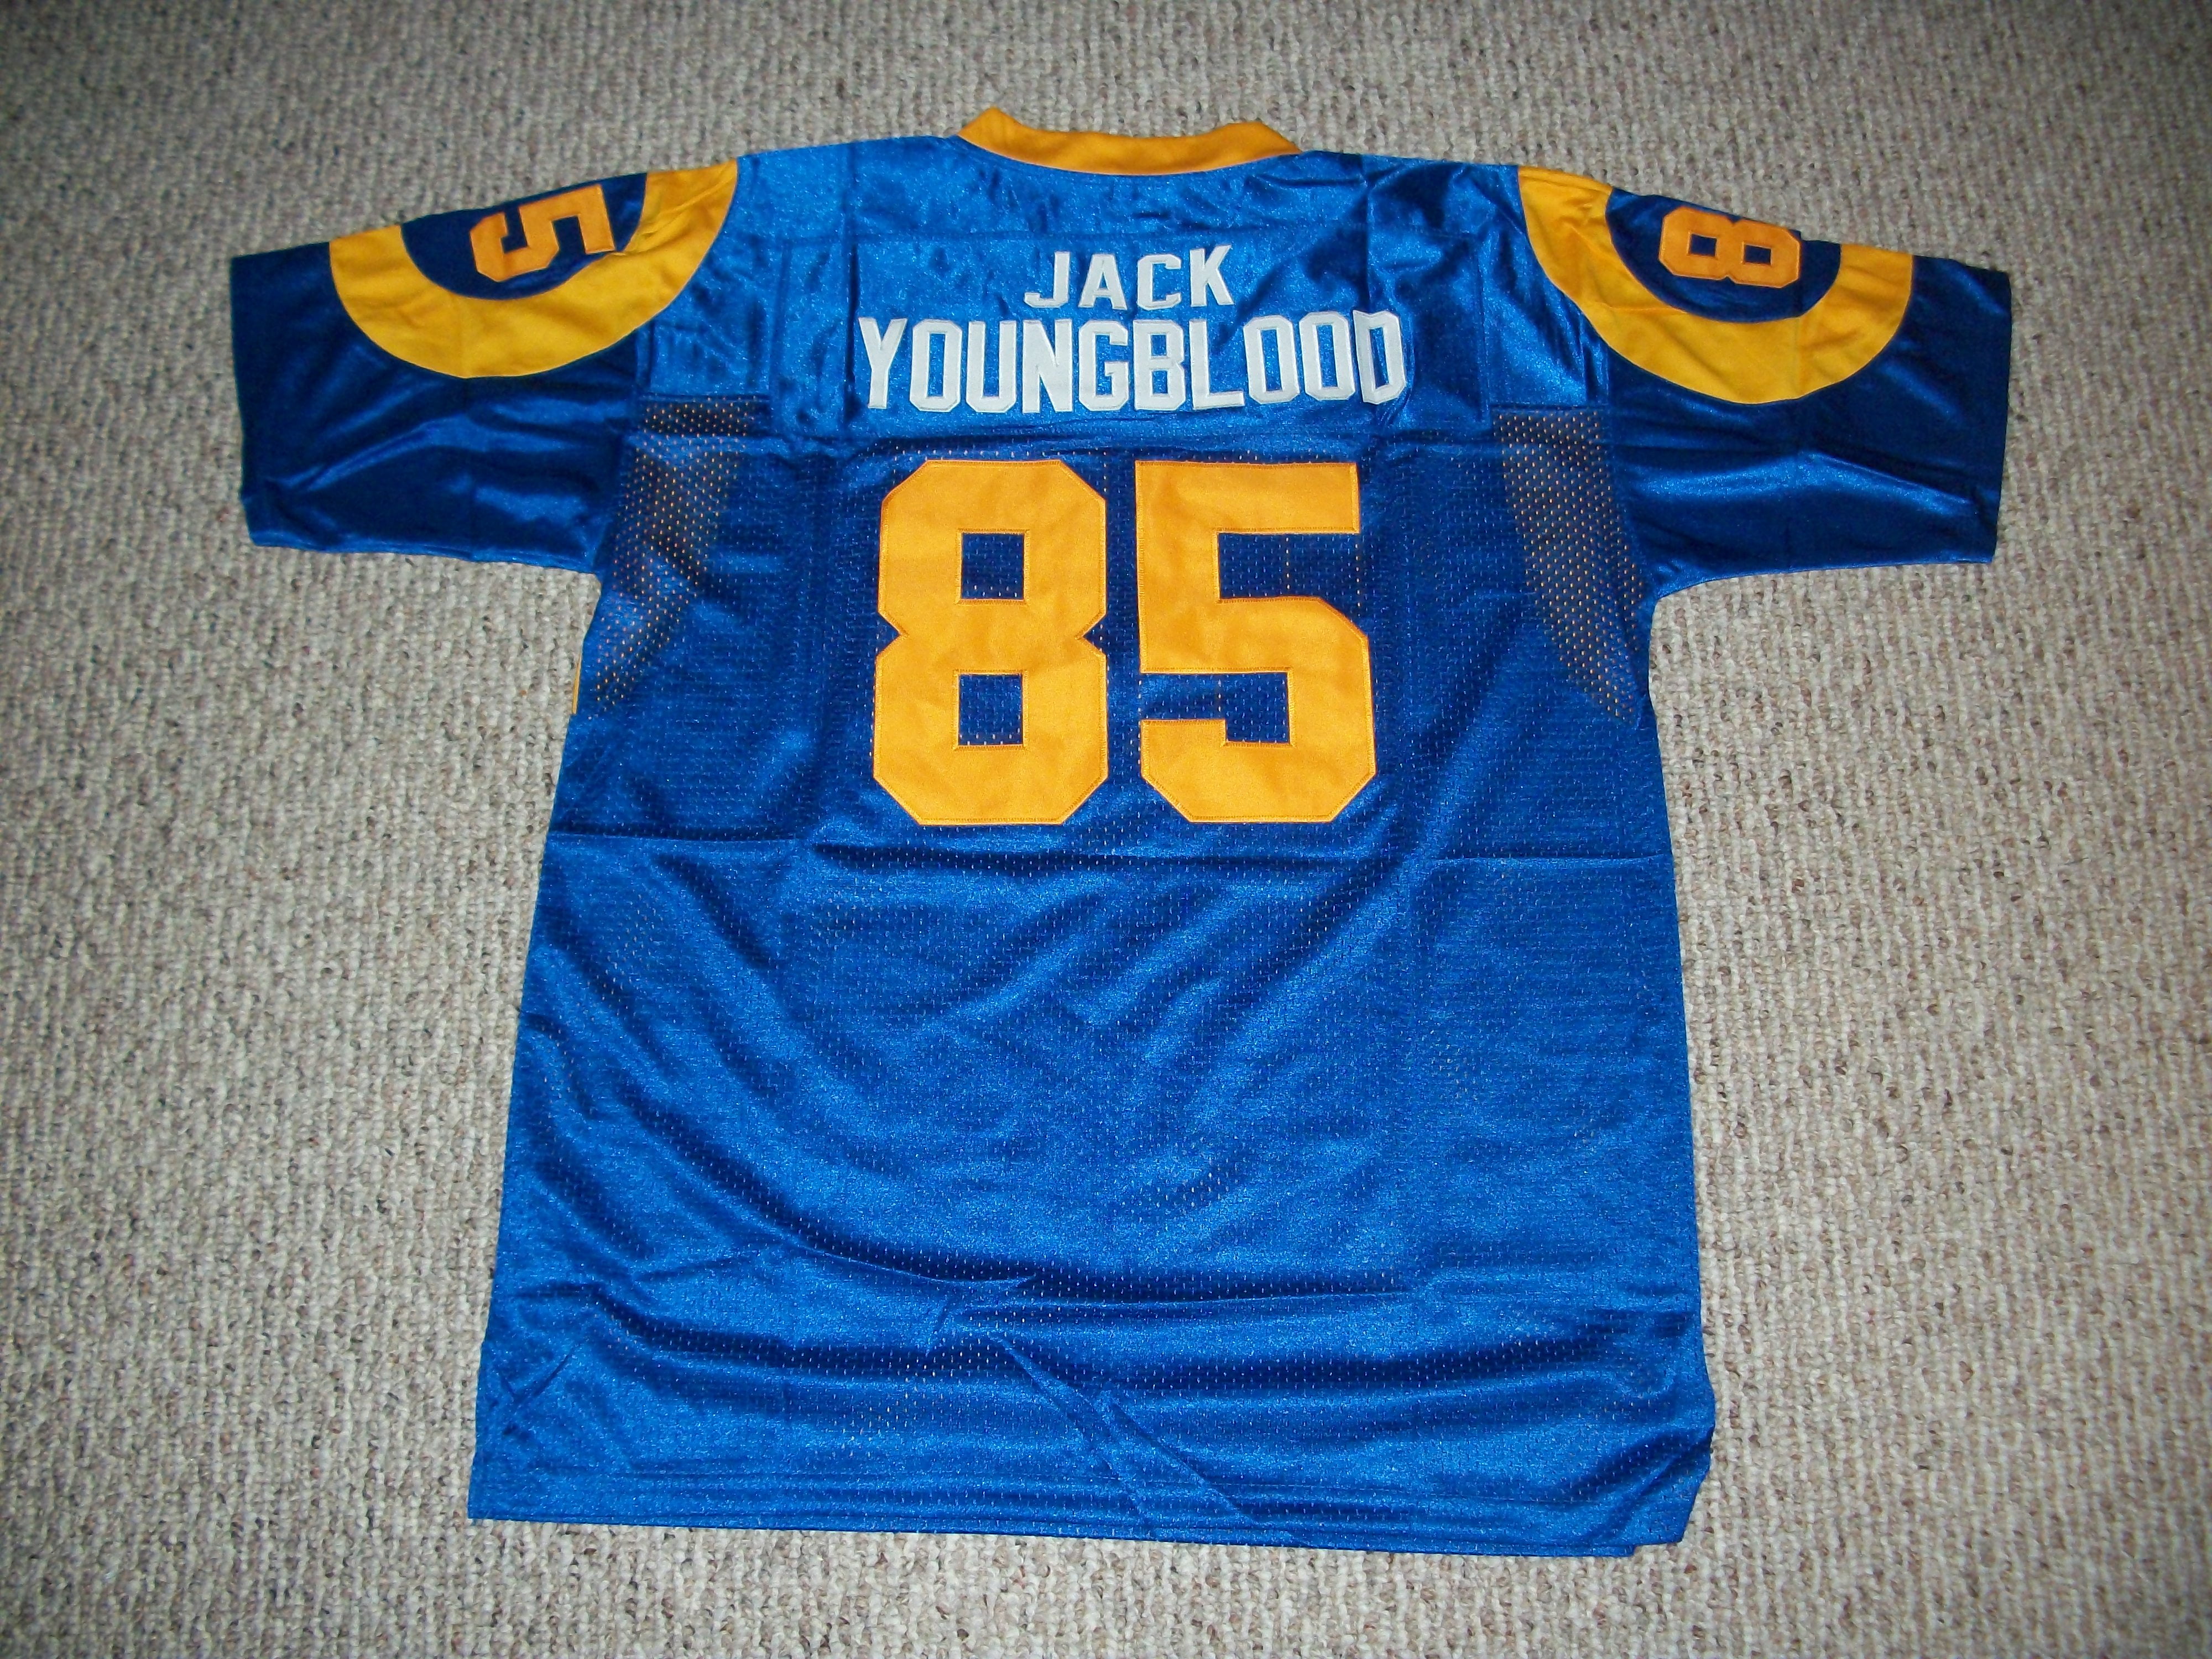 Jack Youngblood Jersey #85 Los Angeles Unsigned Custom Stitched Blue Football New No Brands/Logos Sizes S-3XL - Walmart.com